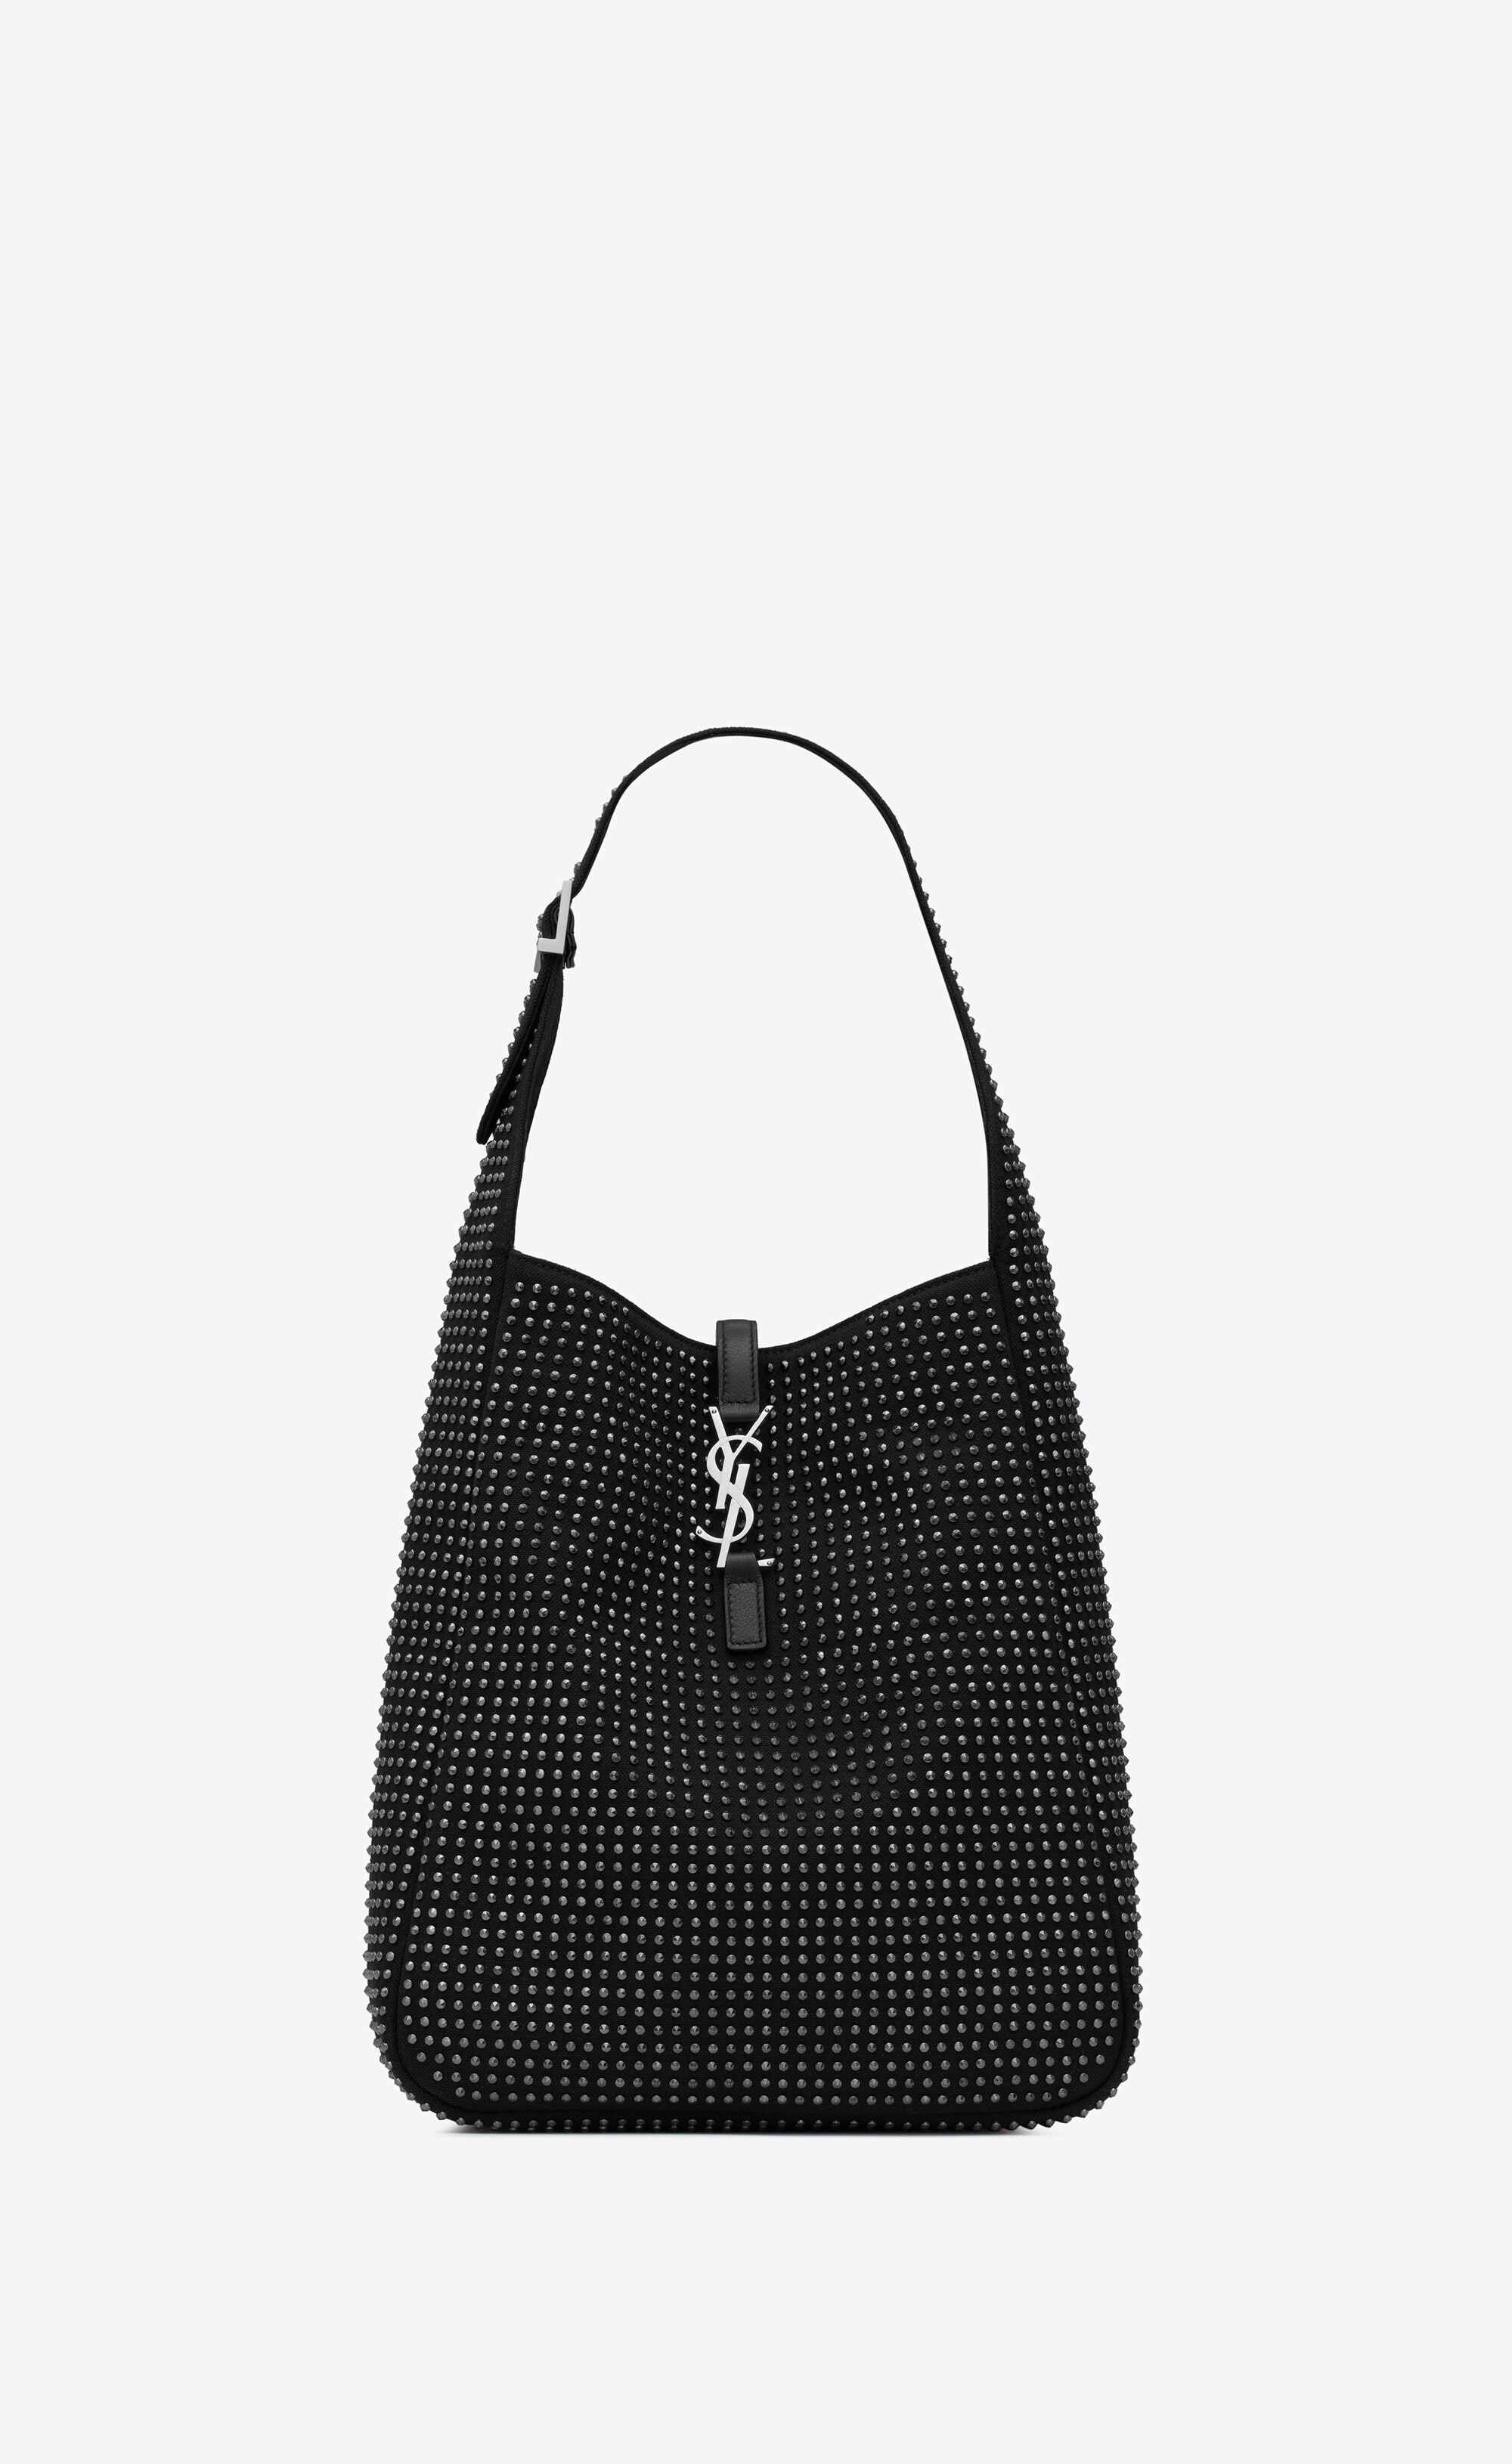 le 5 à 7 soft medium hobo bag in canvas, leather and studs - 1